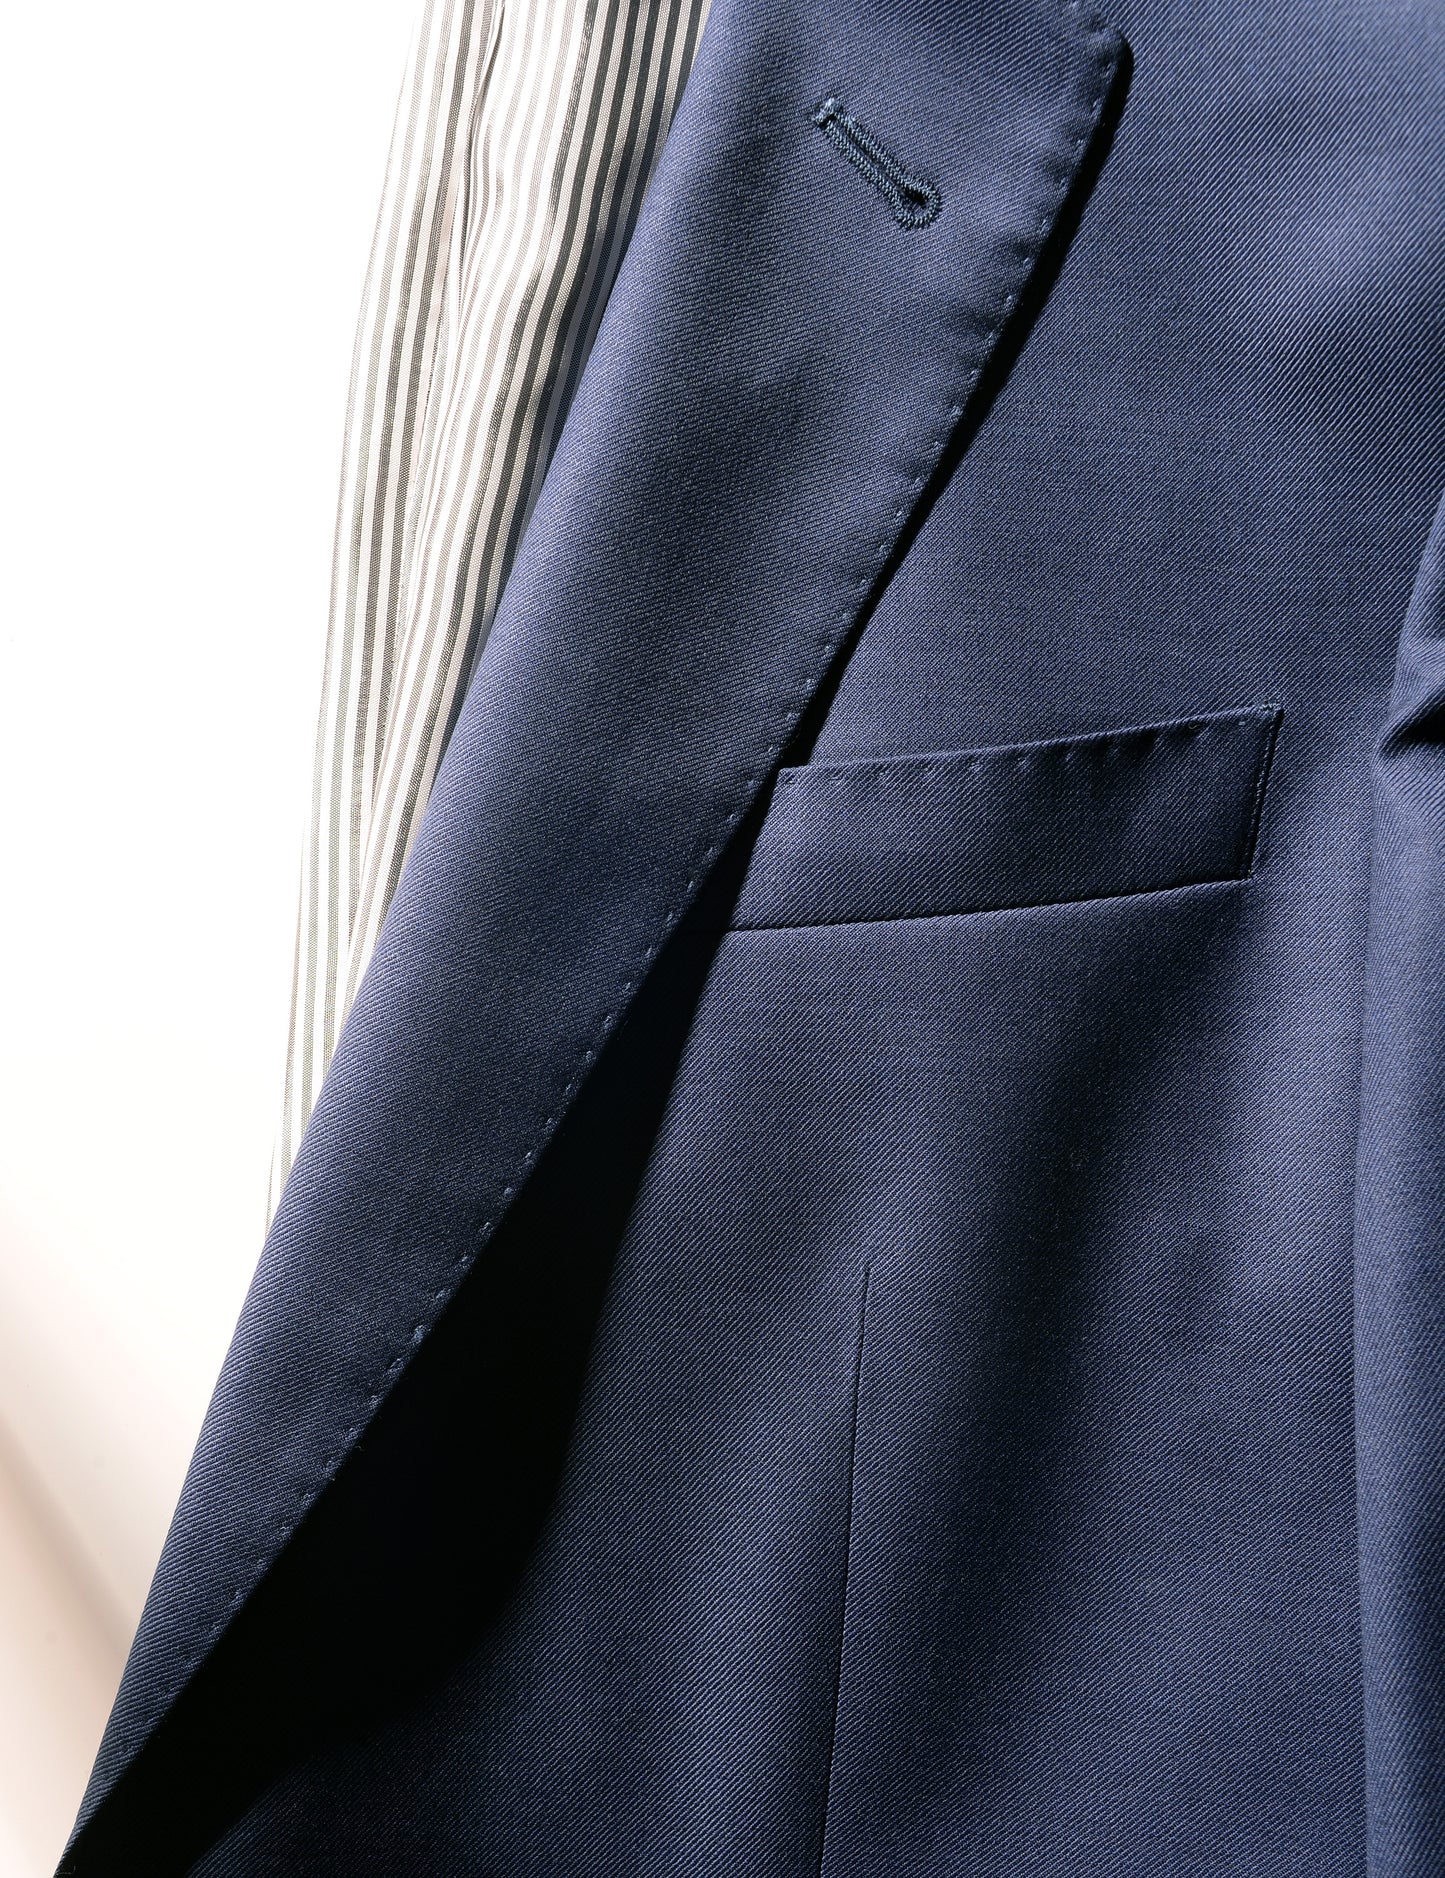 Detail shot of Brooklyn Tailors BKT50 Tailored Jacket in Super 120s Twill - Bright Navy showing lapel and chest pocket